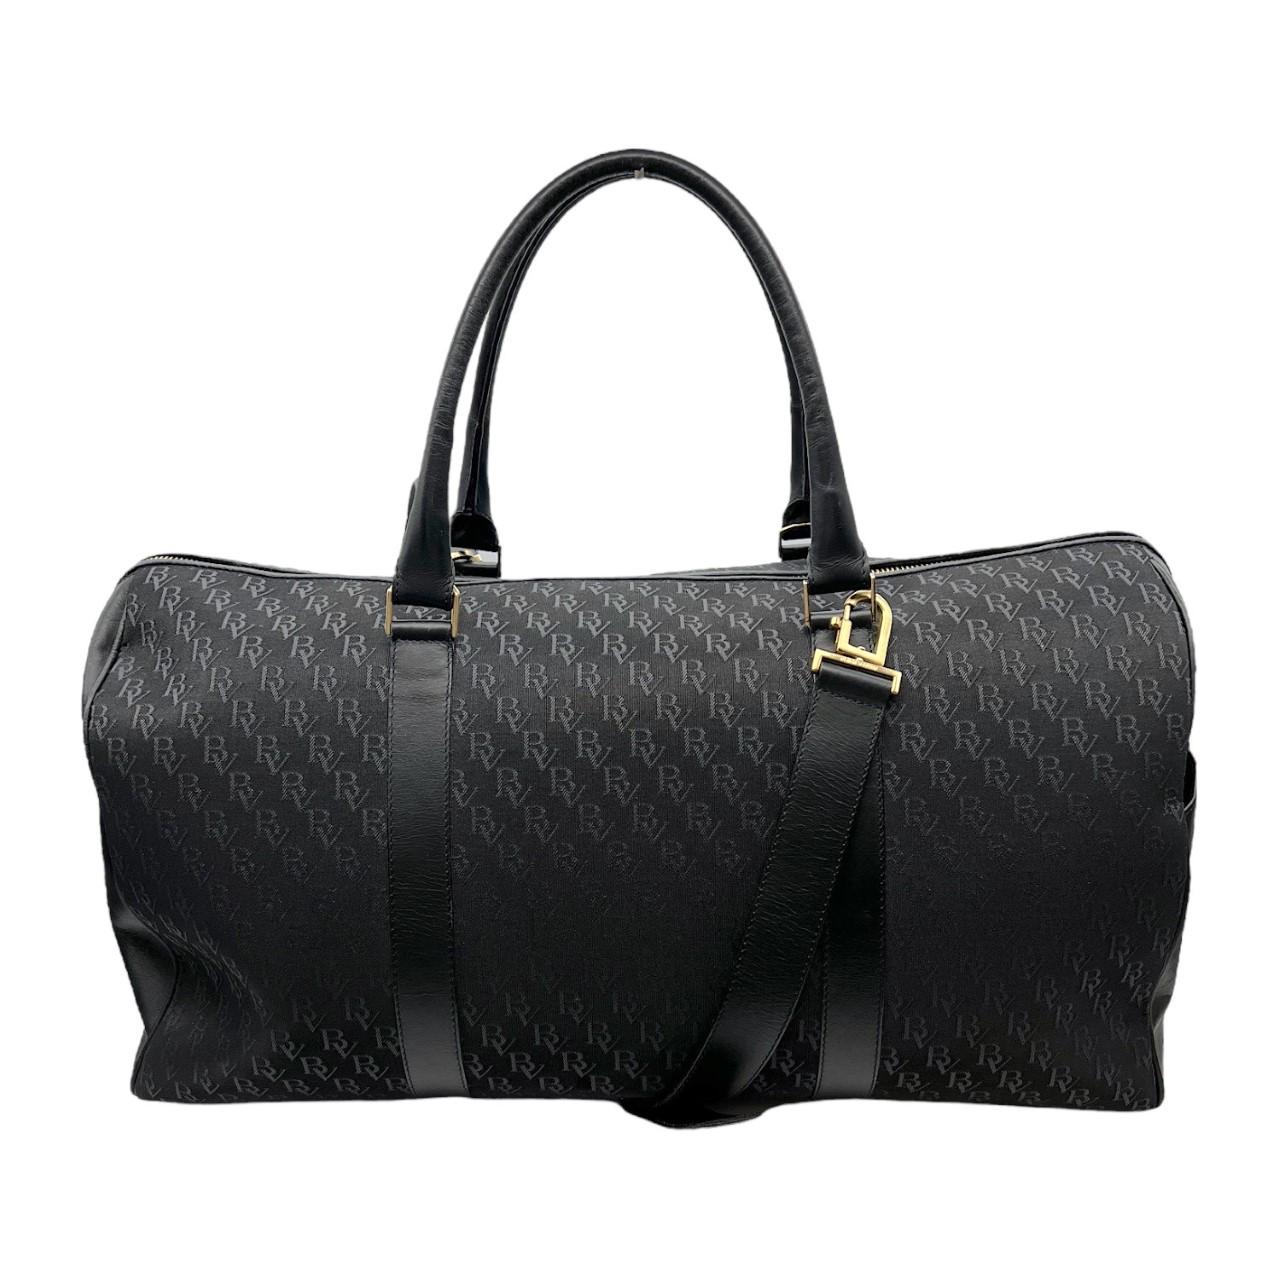 We are offering this black Bottega Veneta Monogram Duffle Bag. Made in Italy, it is finely crafted of a black Bottega Veneta Monogram canvas exterior with black leather trimming and gold-tone hardware features. It also has 2 slip pockets on the side